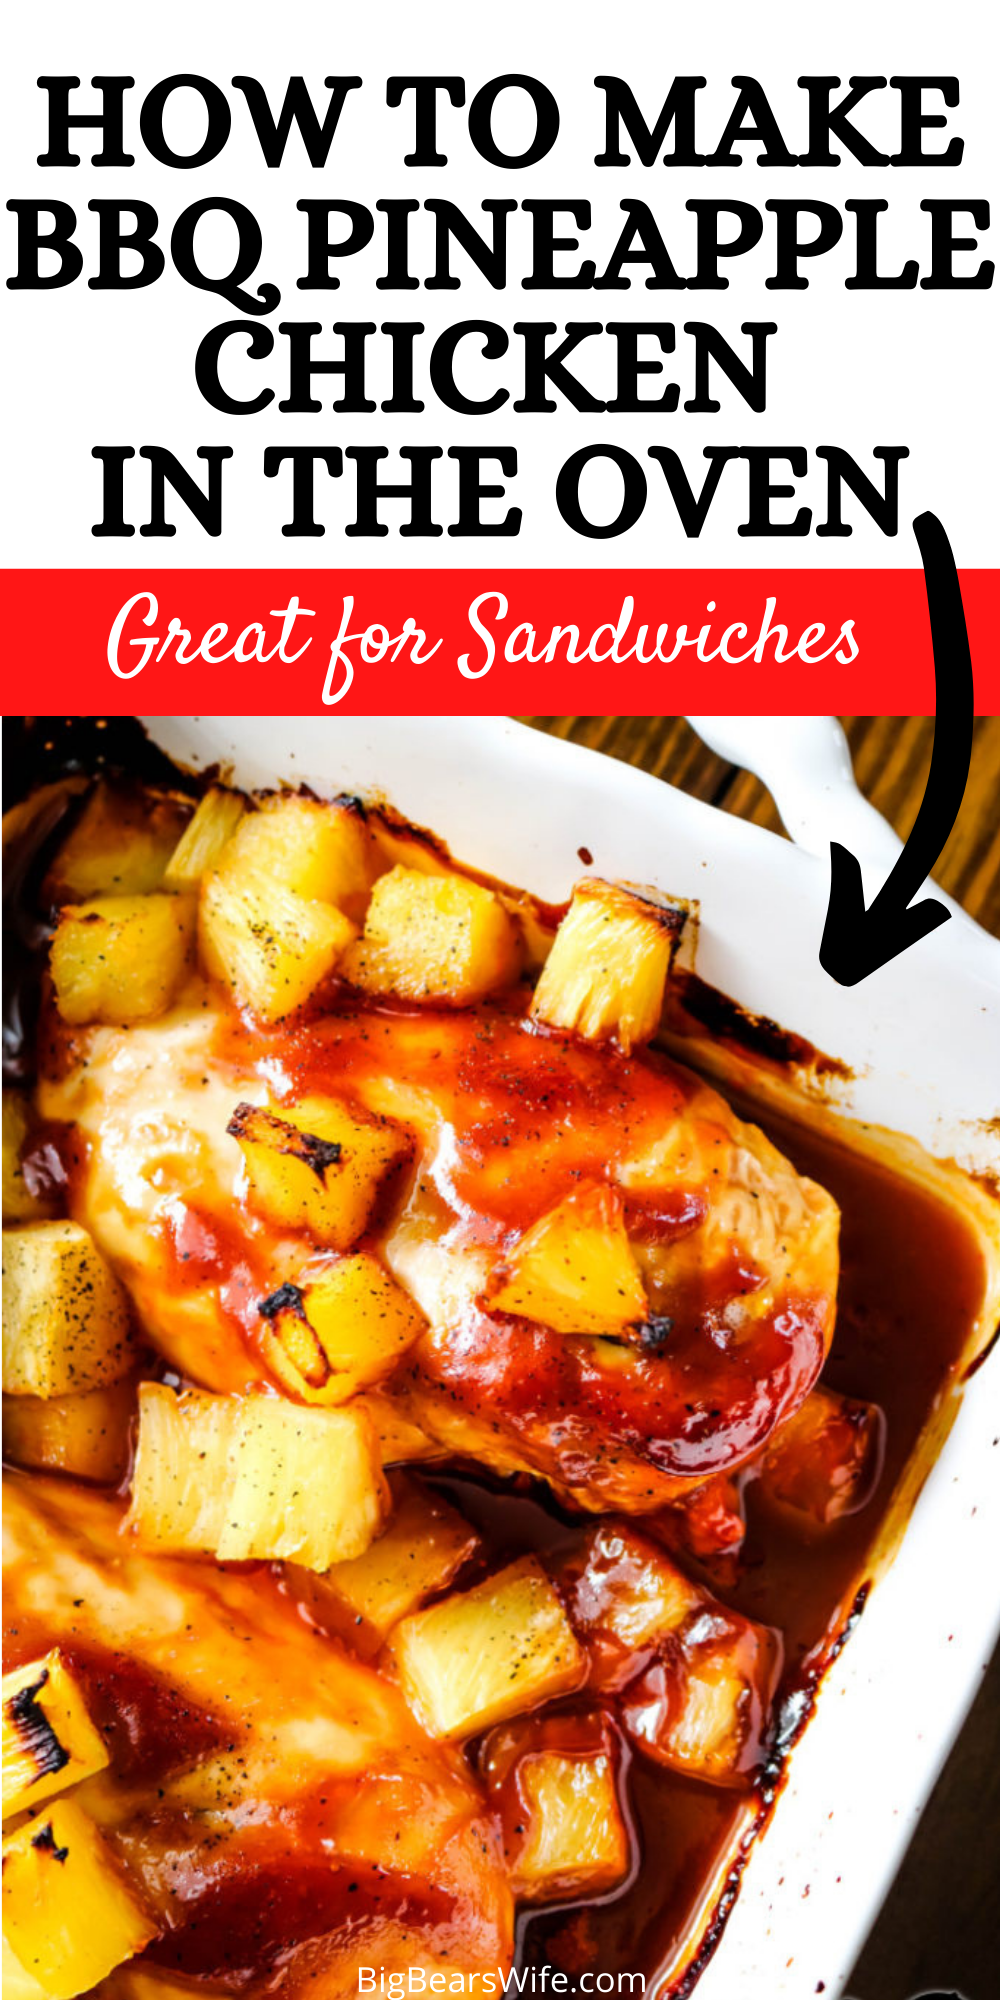 Learn how to make Pineapple BBQ Chicken in the oven! It's perfect as a main dish and also great to shred for Chicken sandwiches and tacos! Leave out the pineapple and it's the perfect Oven baked BBQ chicken.  via @bigbearswife